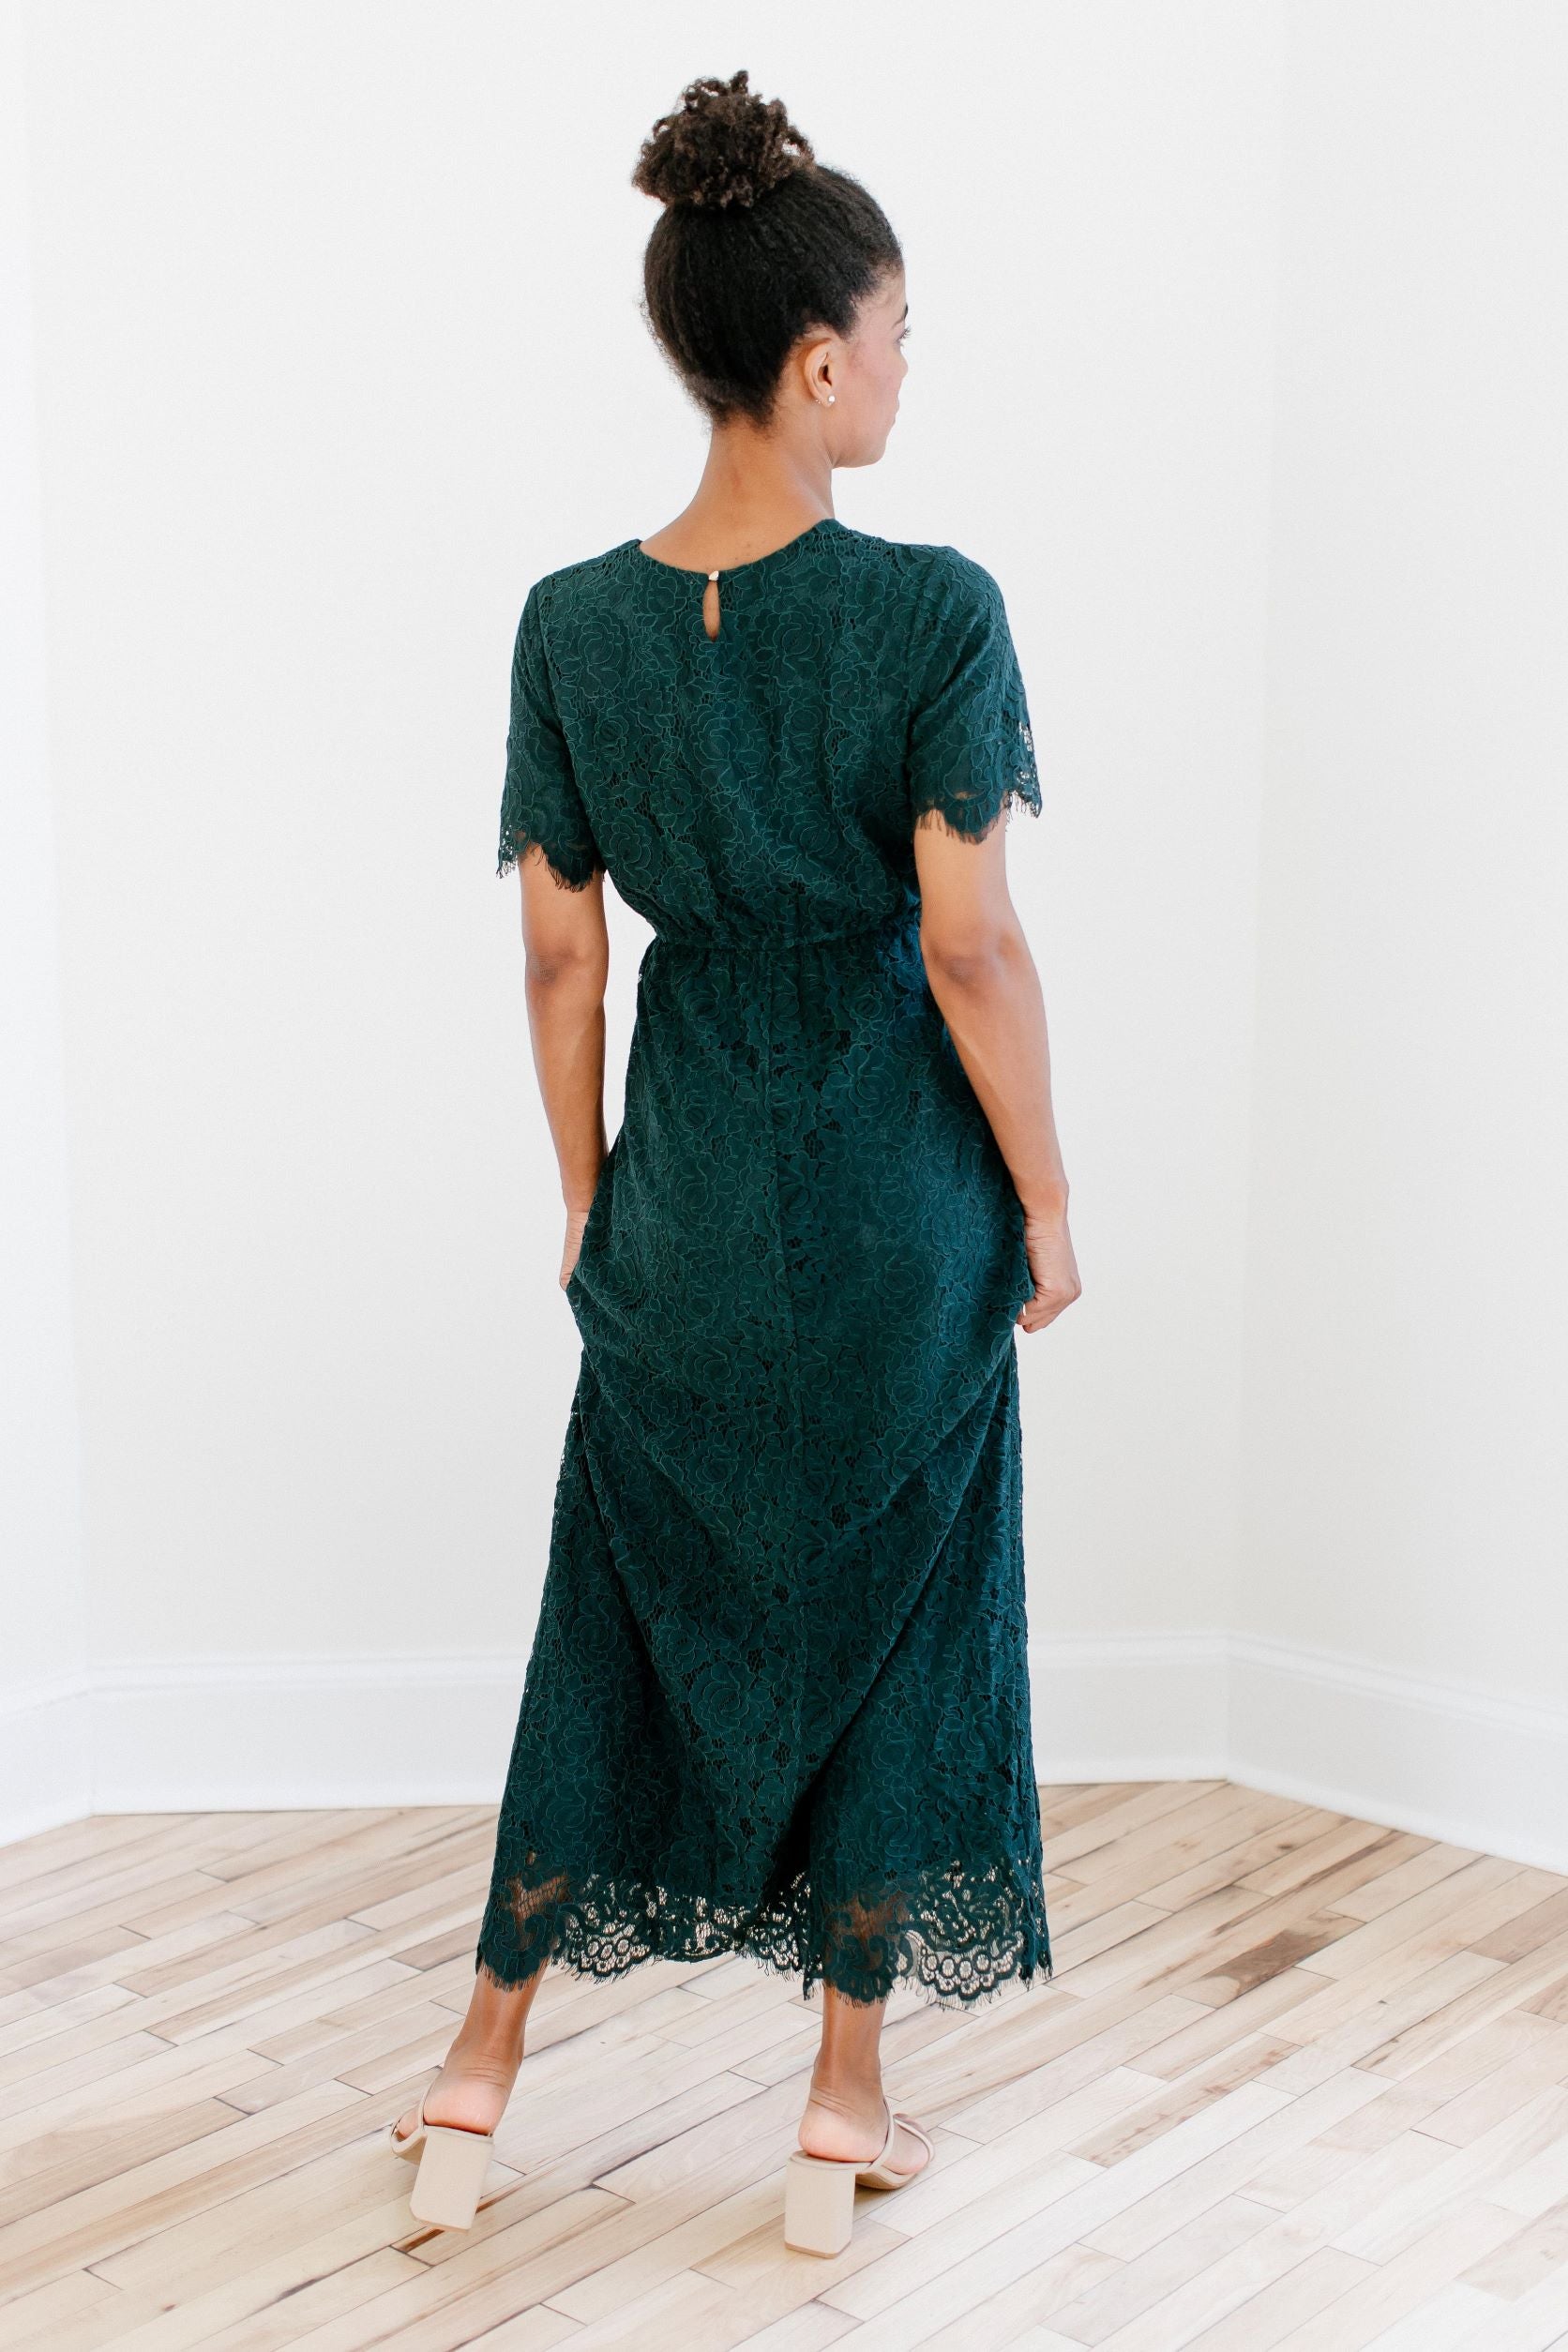 Free Spirit Lace Top Maxi Dress in Light Forest Green